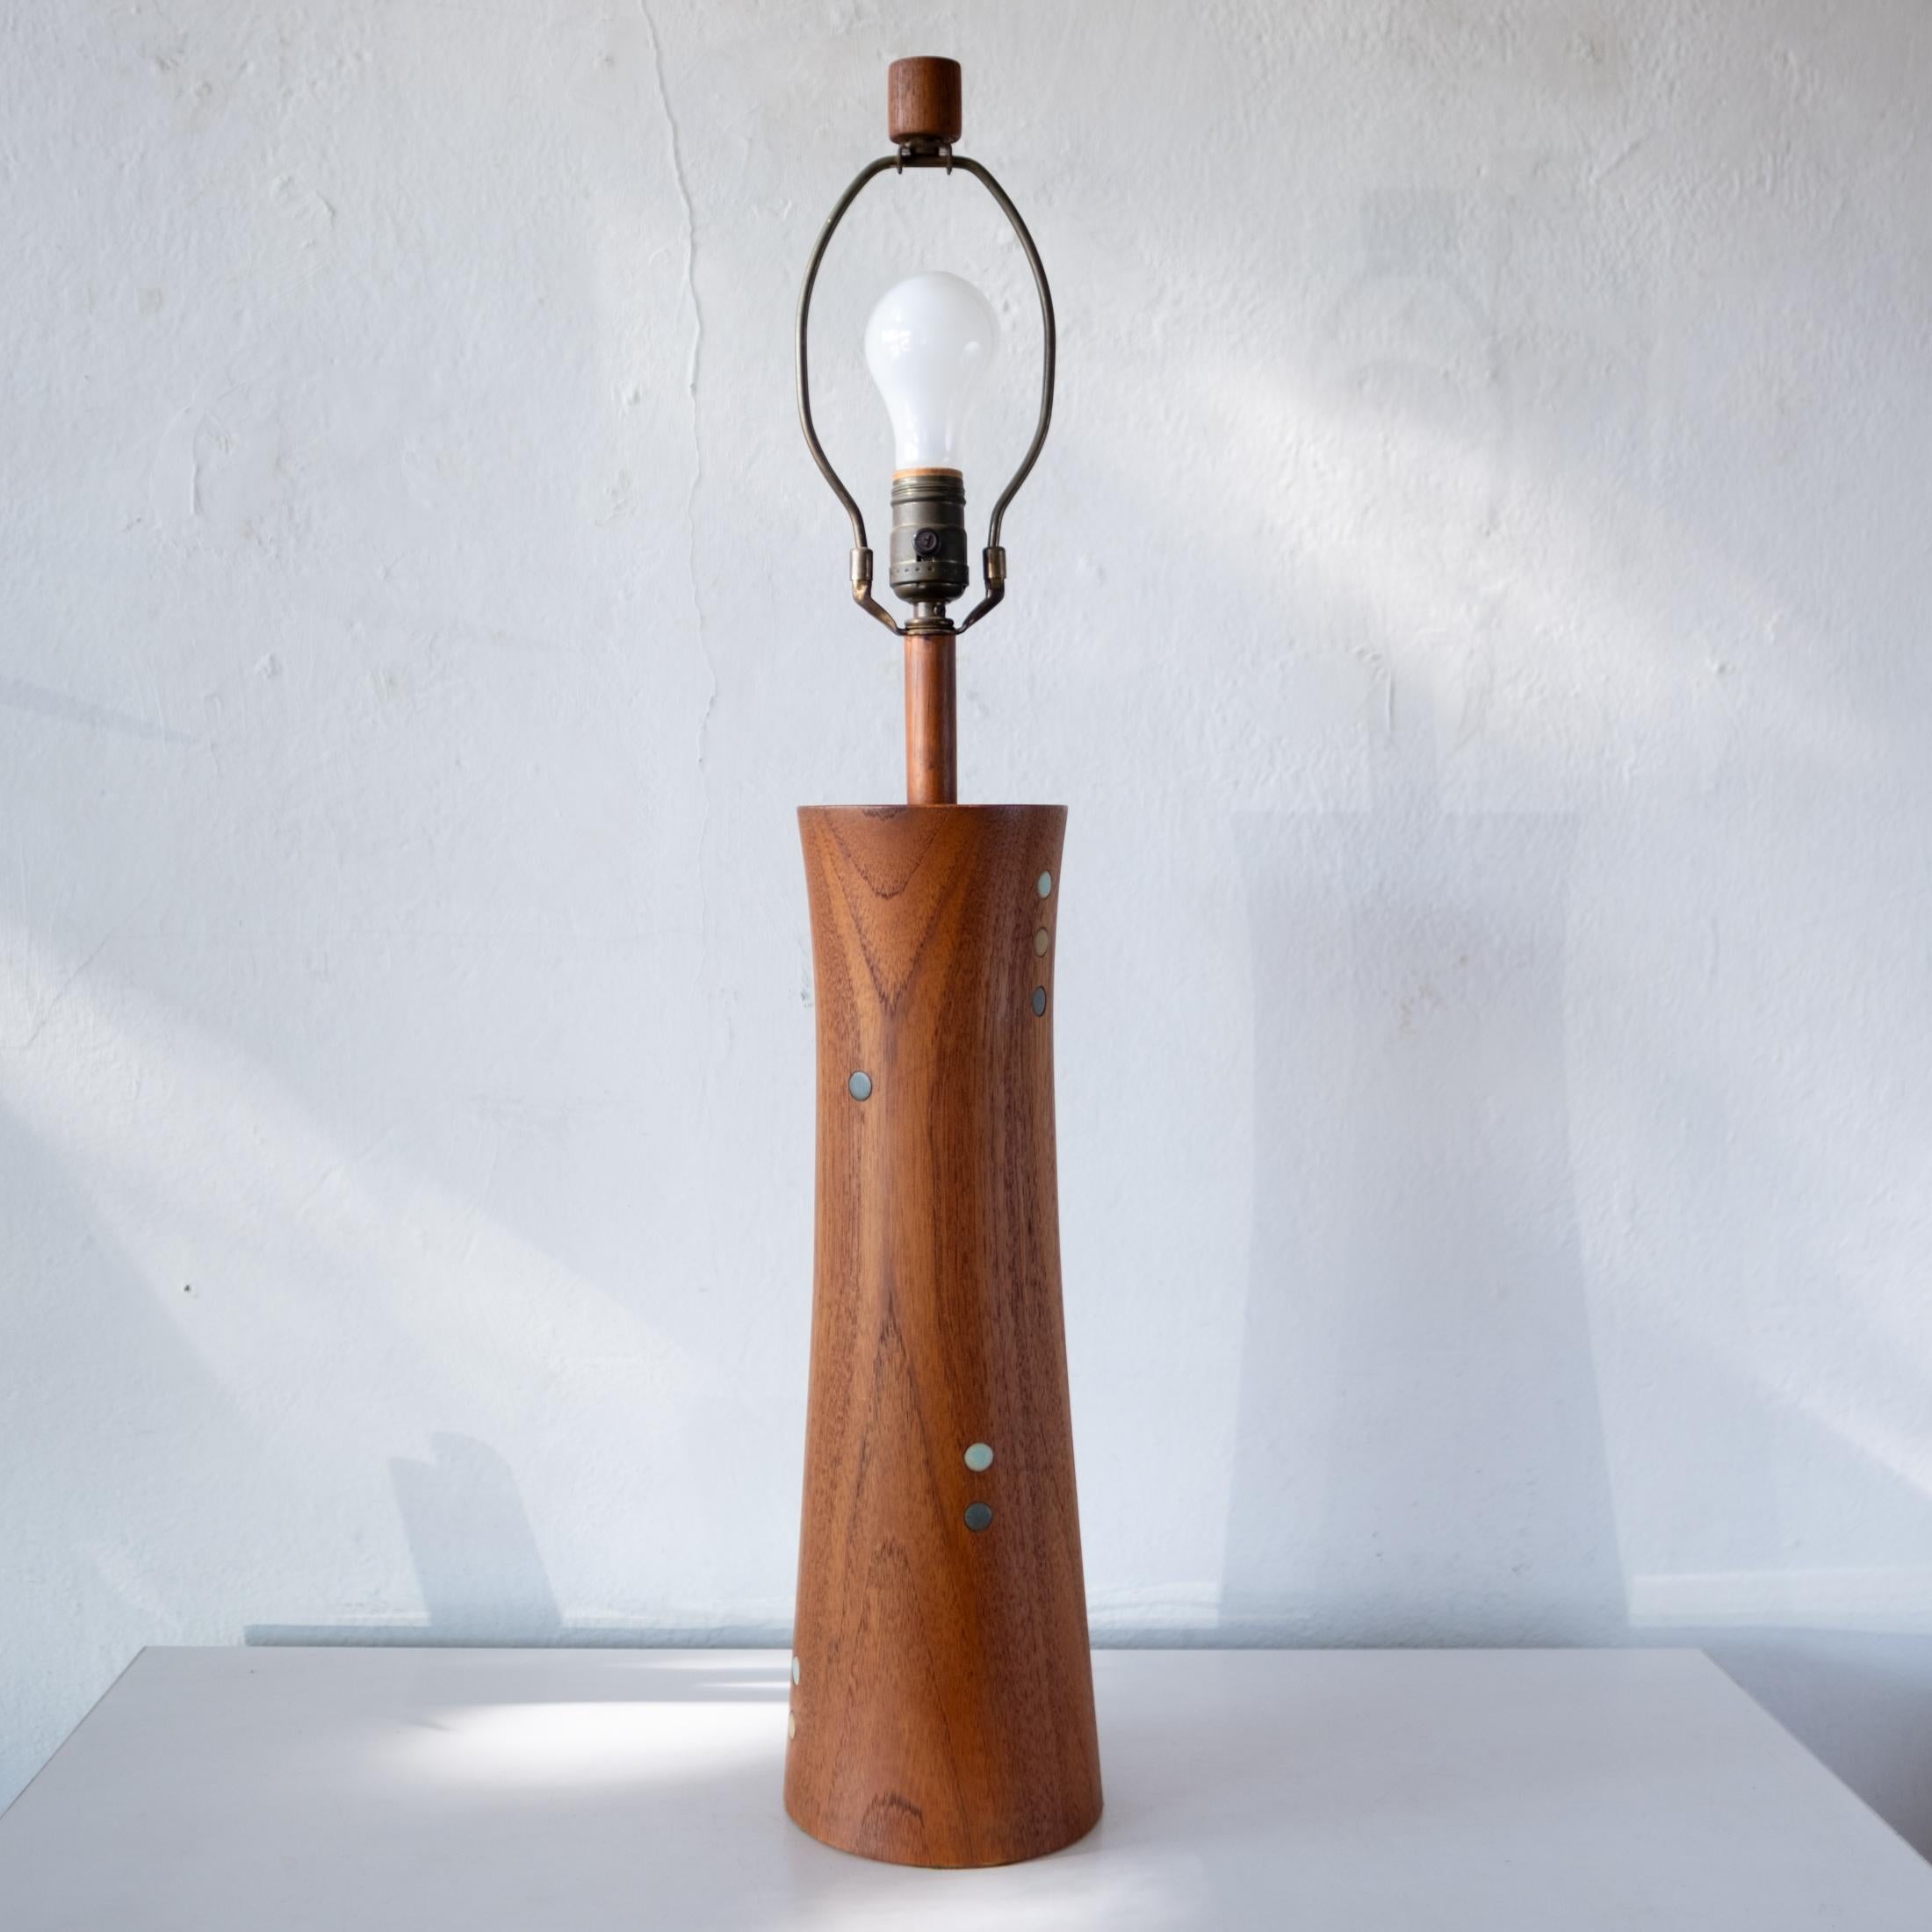 Turned walnut lamp with ceramic inlay by Jane and Gordon Martz for their company, Marshall Studios. Solid walnut with ceramic inlay around the perimeter. 

Dimension: 5.75